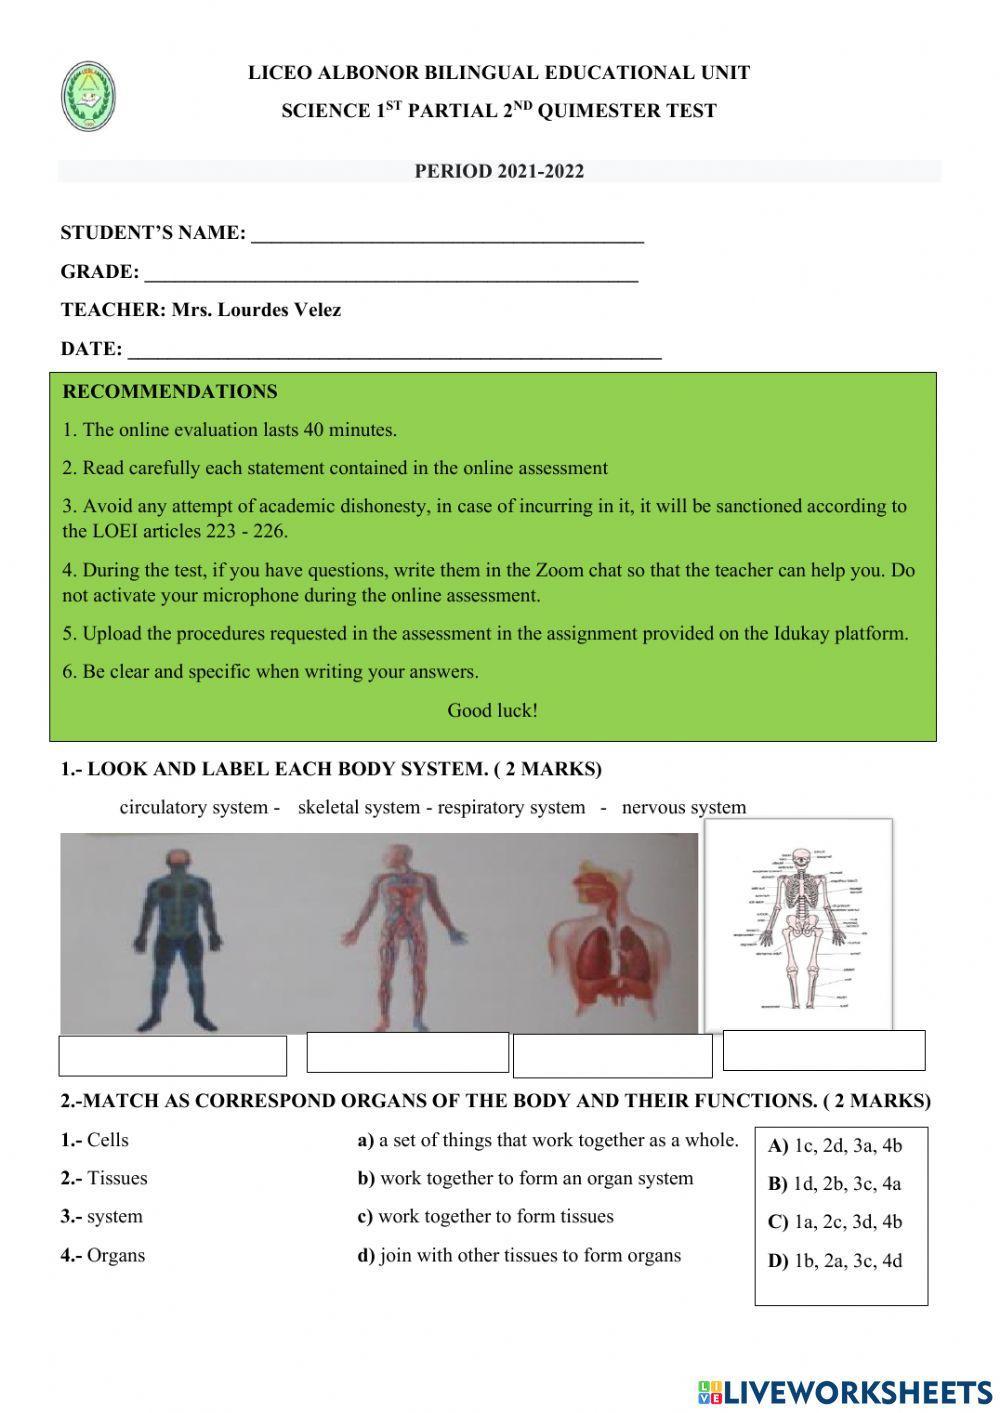 Body System and functions Summative Test